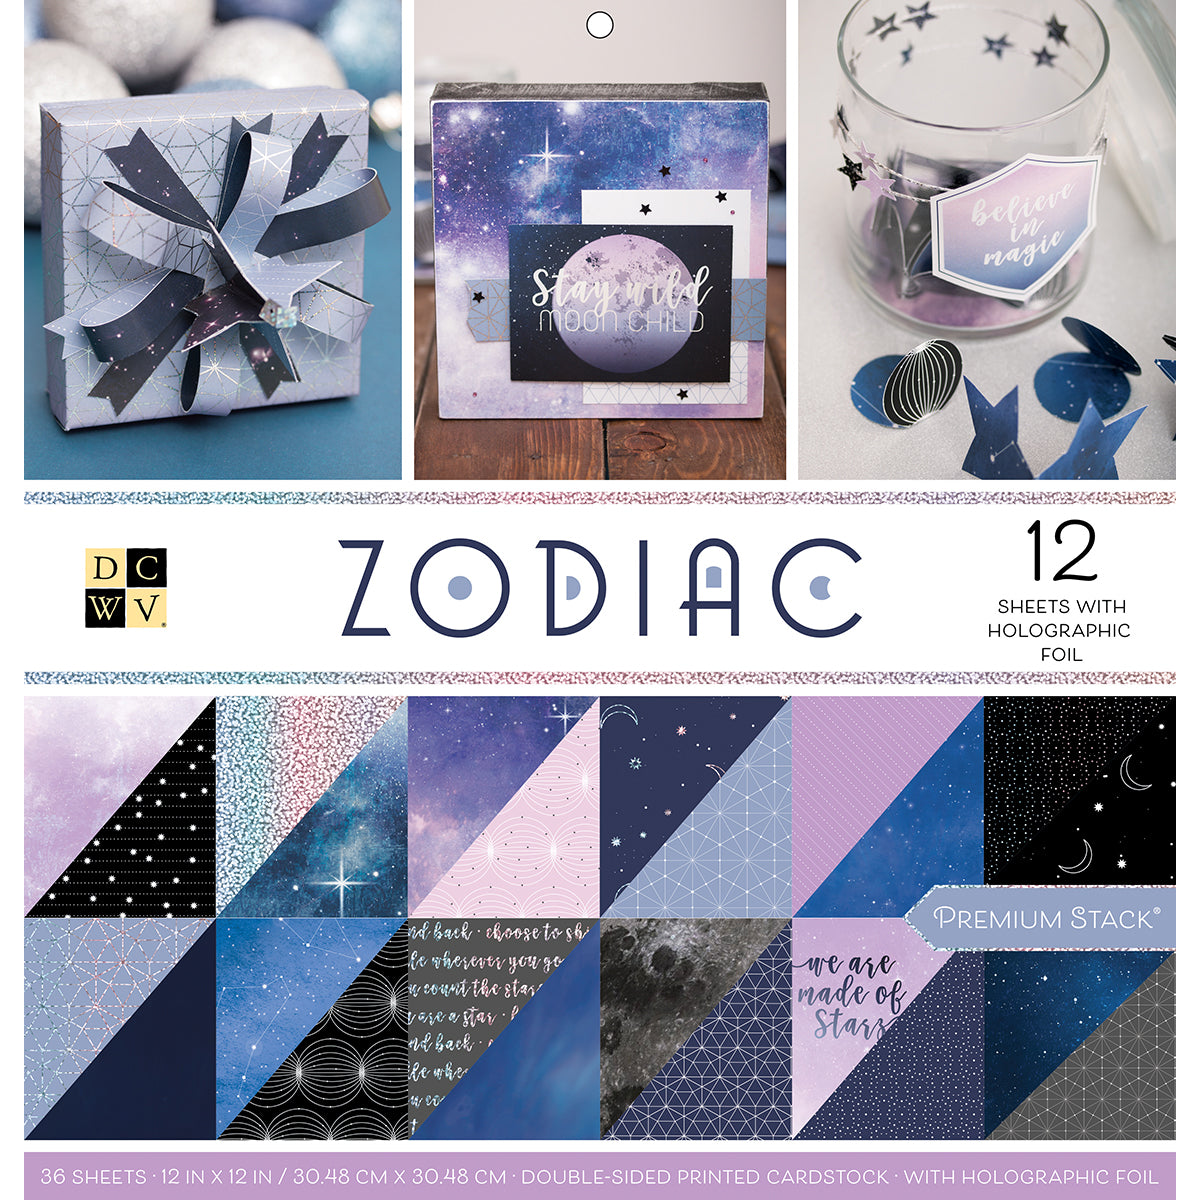 Dcwv Double-Sided Cardstock Stack 12x12 36-pkg-zodiac, 12 W-holographic Foil